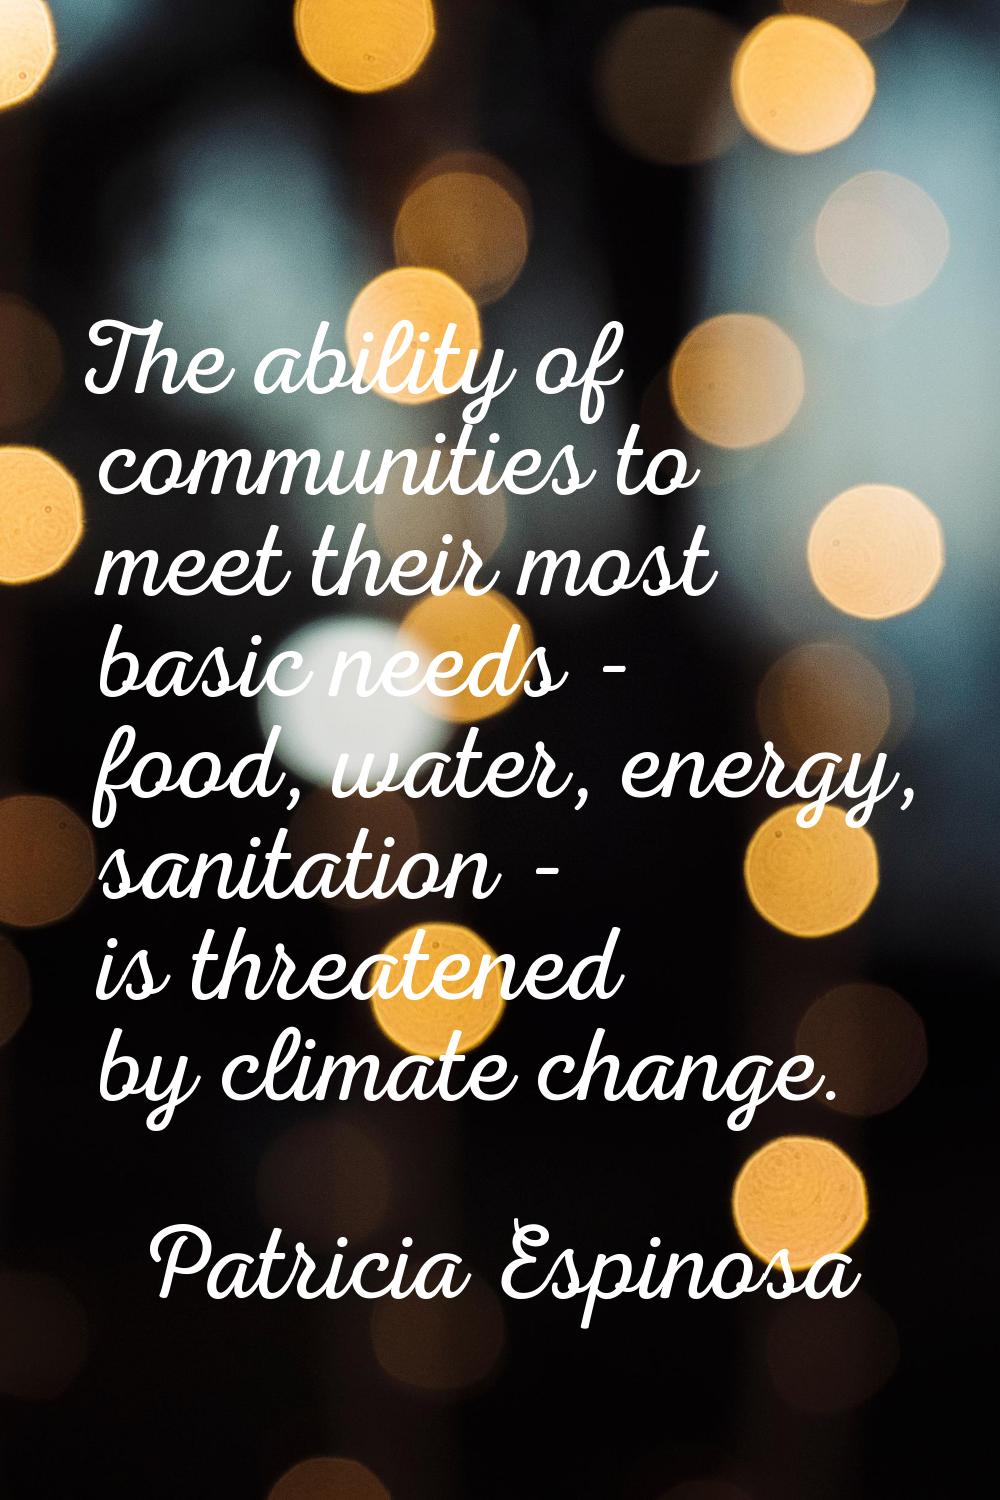 The ability of communities to meet their most basic needs - food, water, energy, sanitation - is th